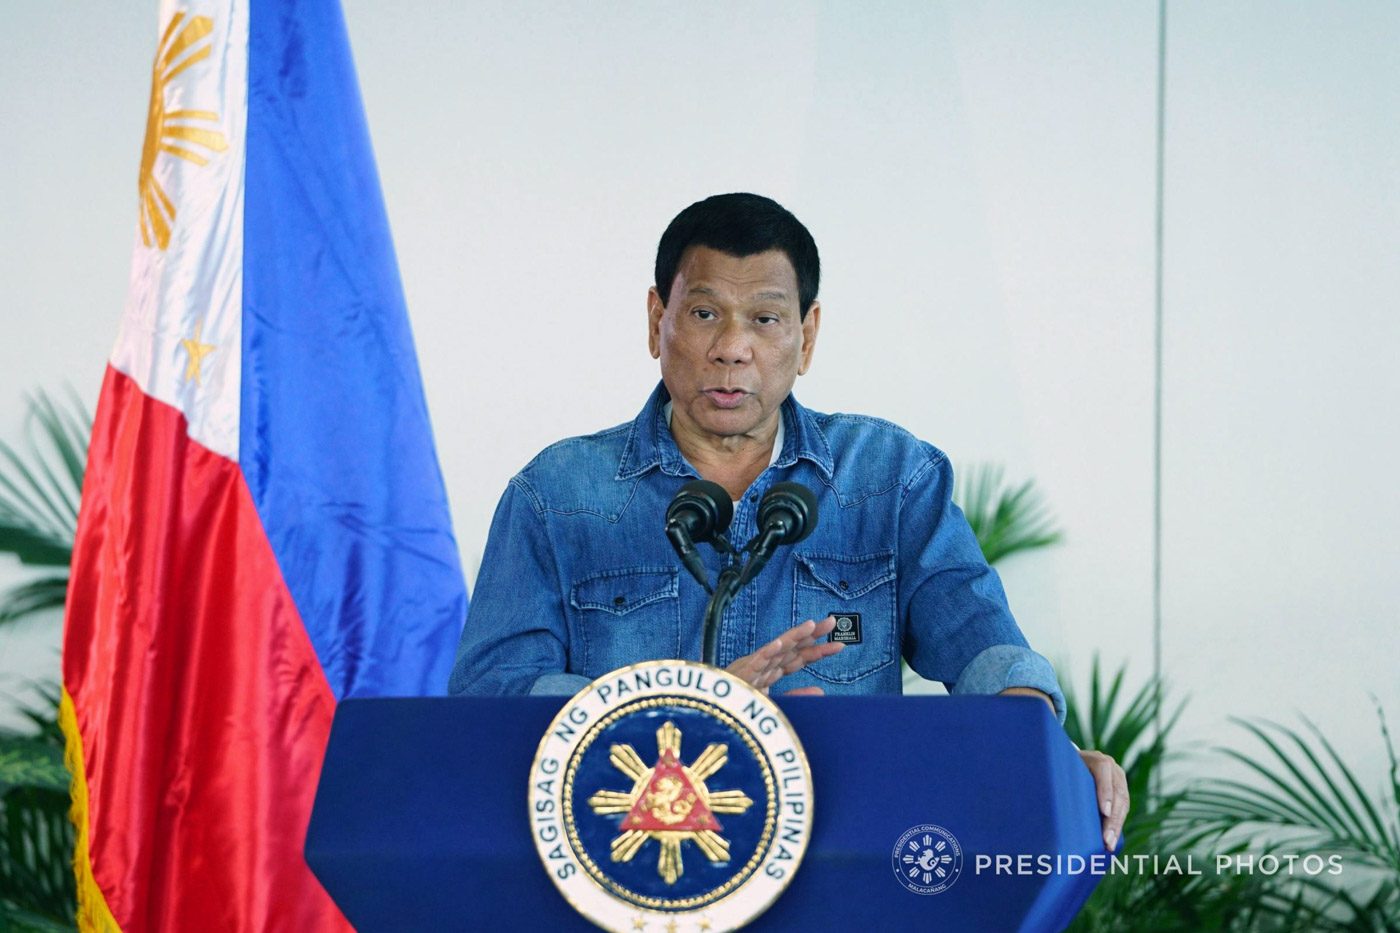 Duterte to Marawi residents: Don’t listen to Leftists about rehabilitation